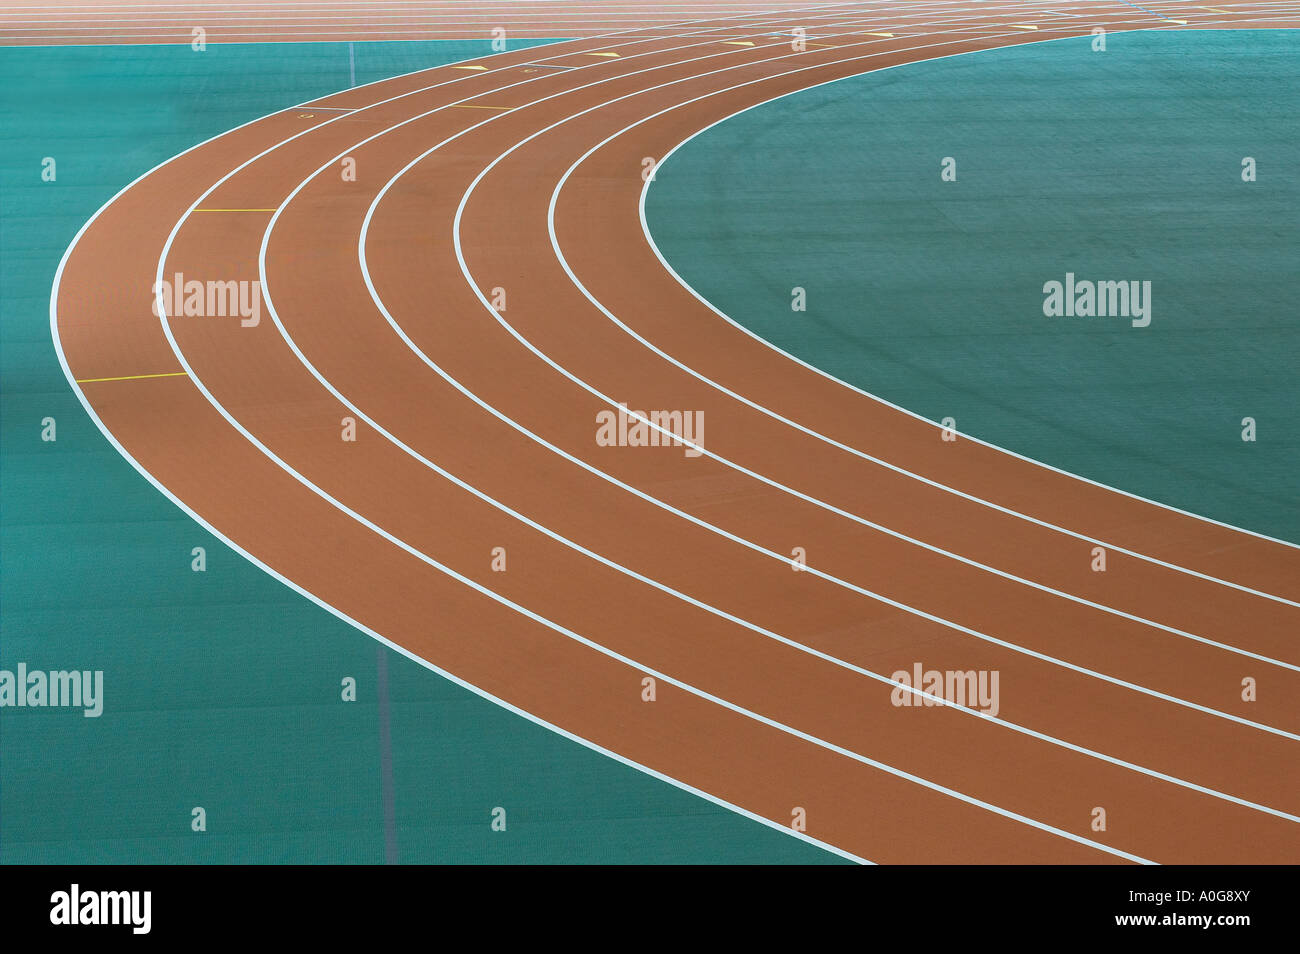 Close Up View Of A Track And Field Event Stadium With The Lanes Forming Graphic Patterns Stock Photo